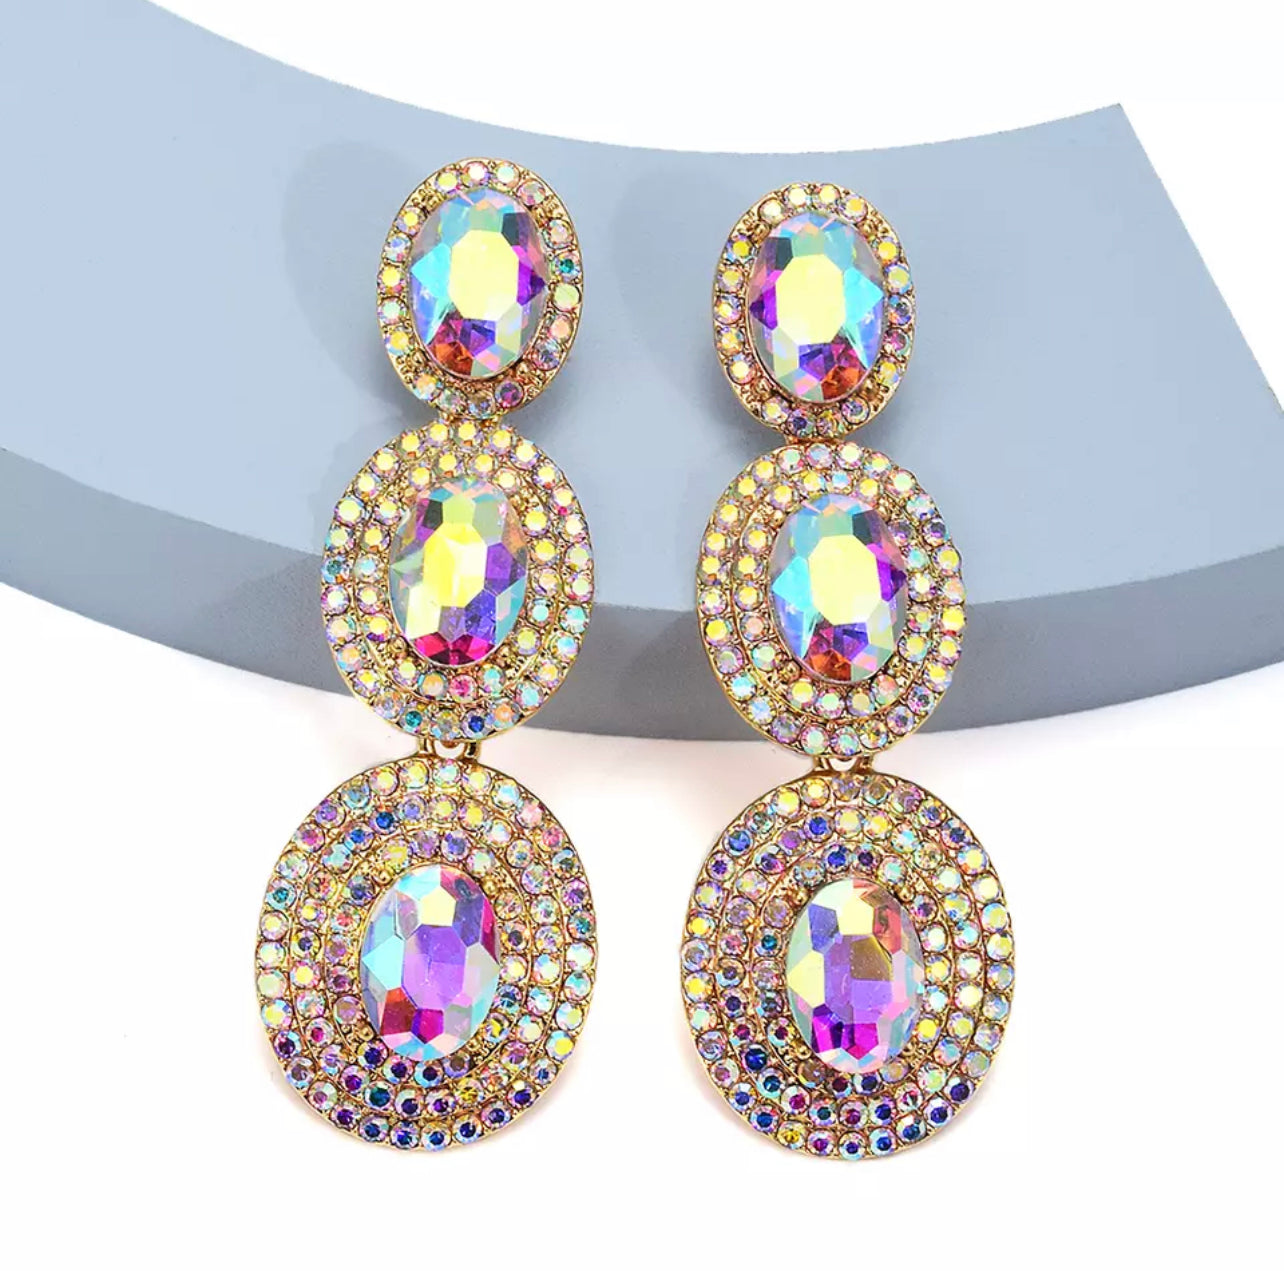 Chan Crystal Earrings (Multi Color Gold)